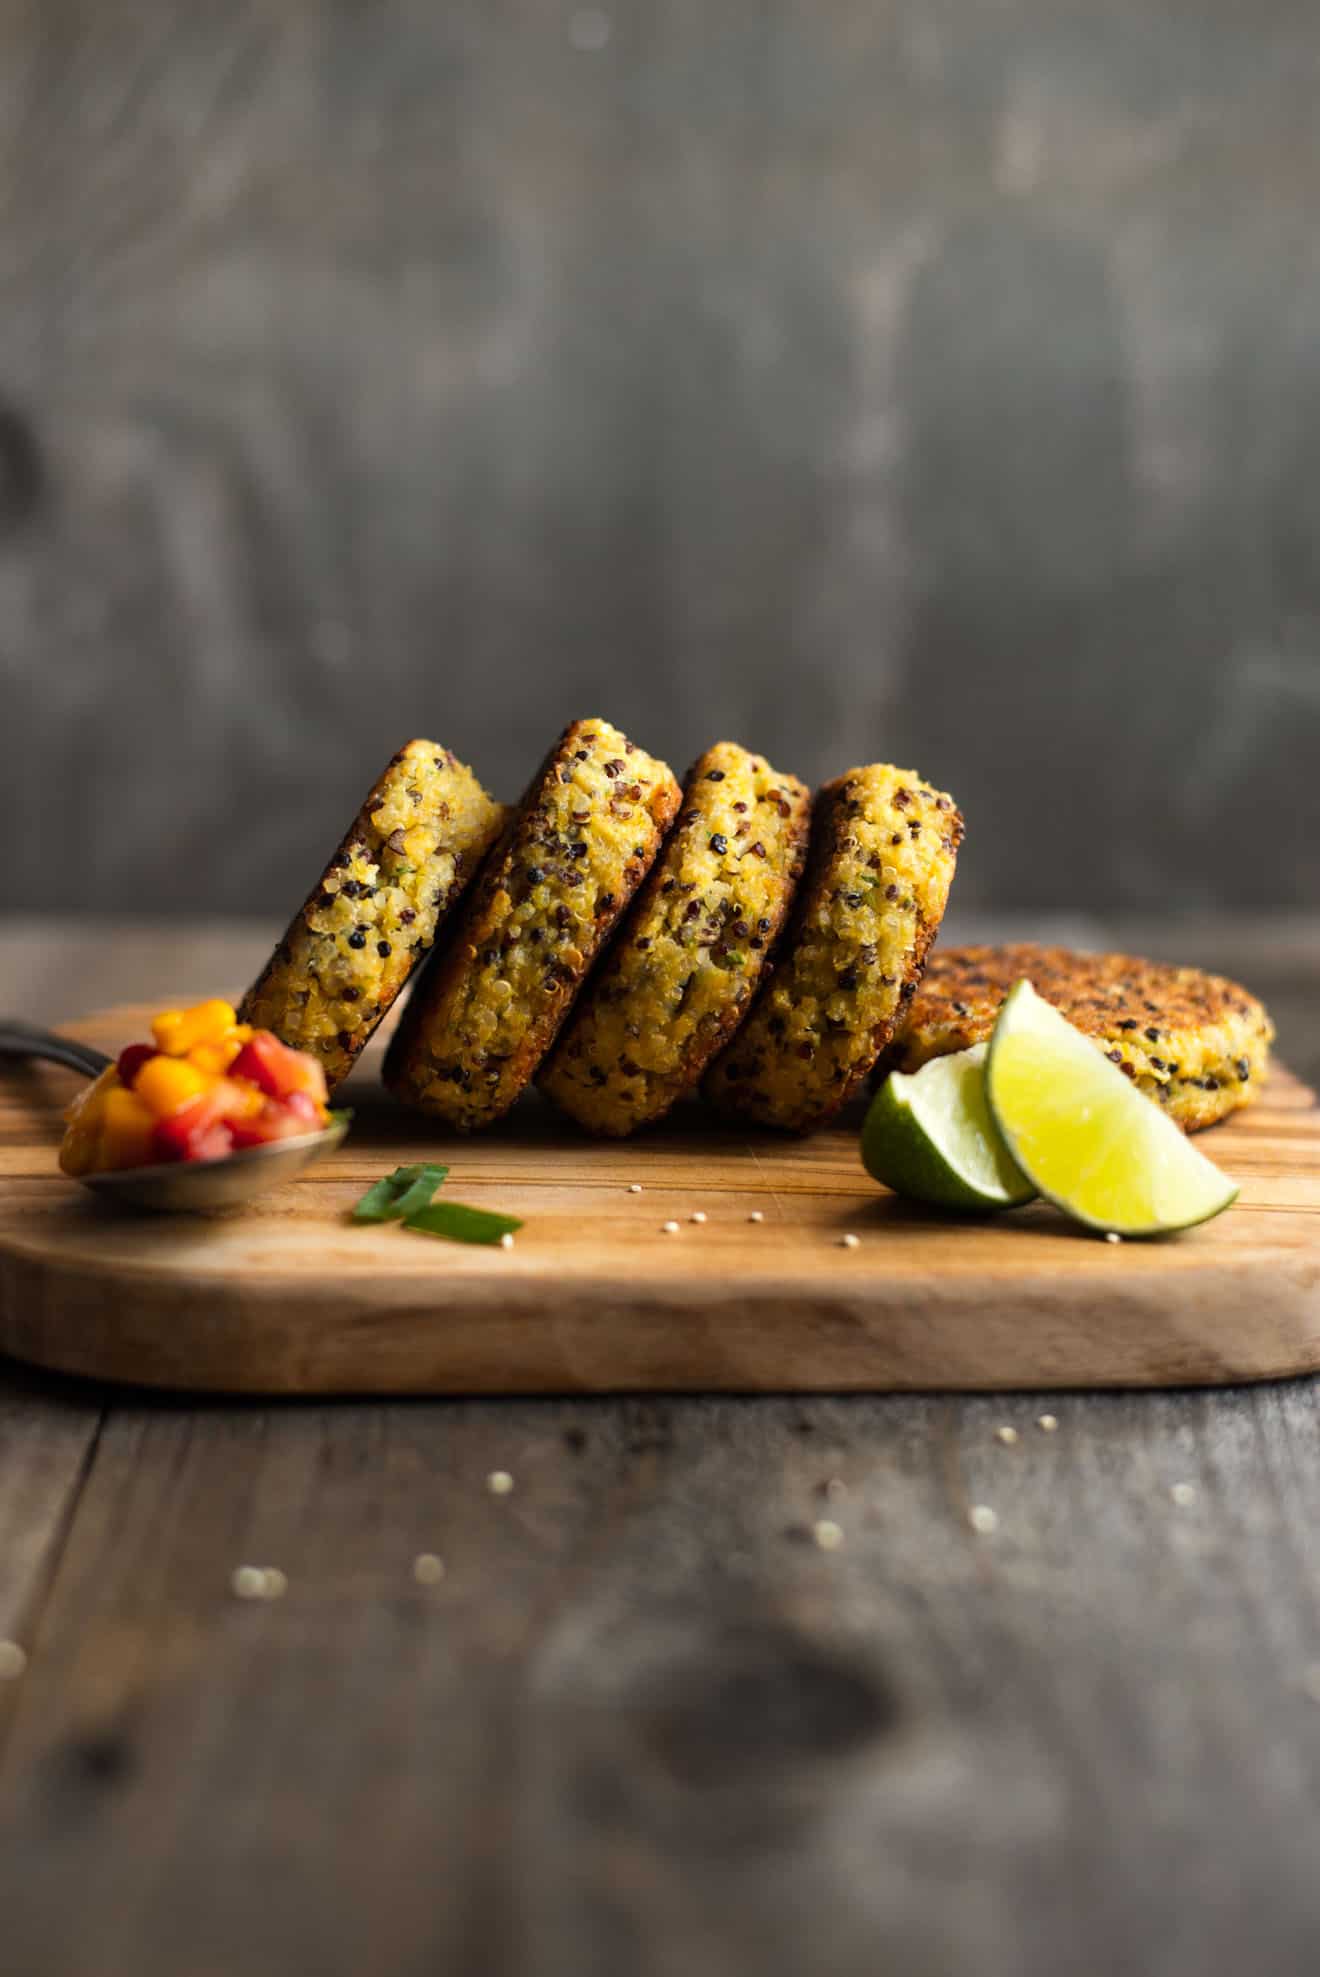 Healthy Quinoa Cakes with Chickpeas and Mango Salsa - these protein packed cakes are great as an appetizer or a meal! by @healthynibs